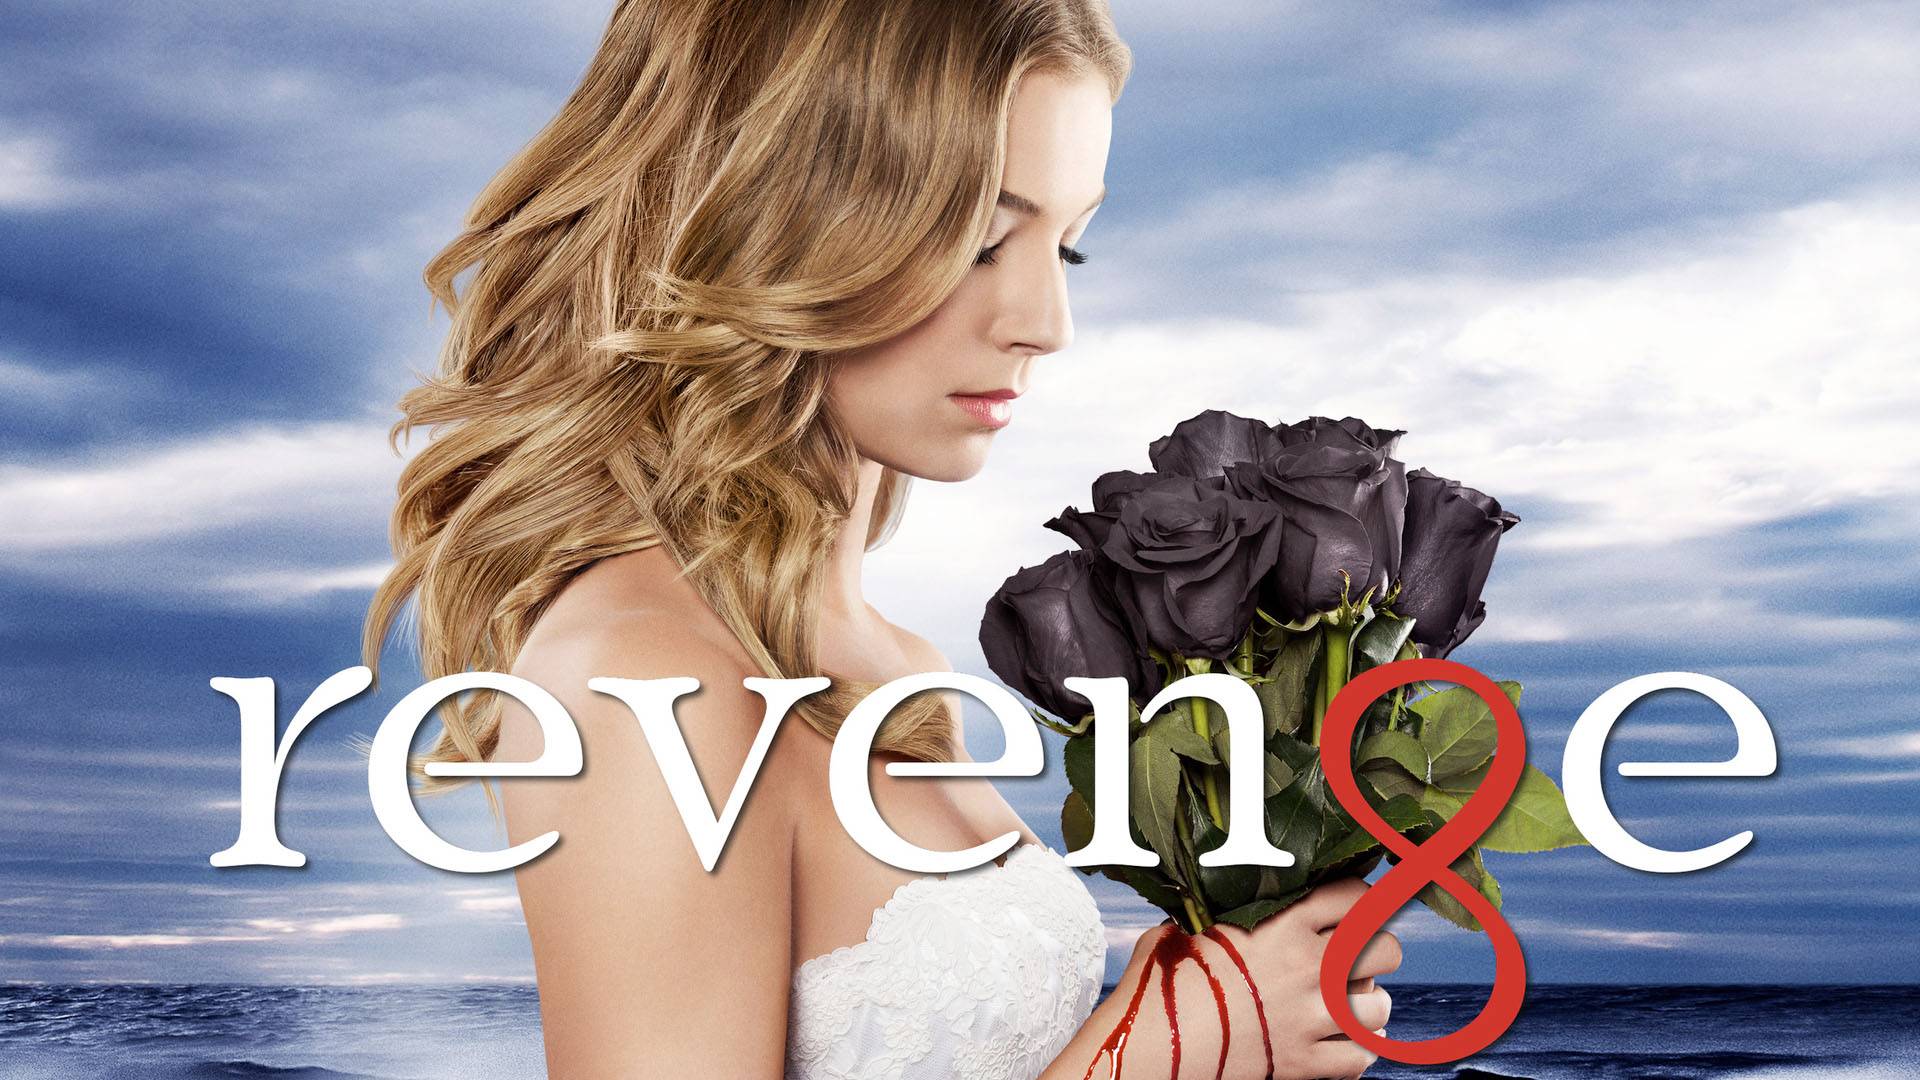 Revenge: Series review. The Supplementary Paper